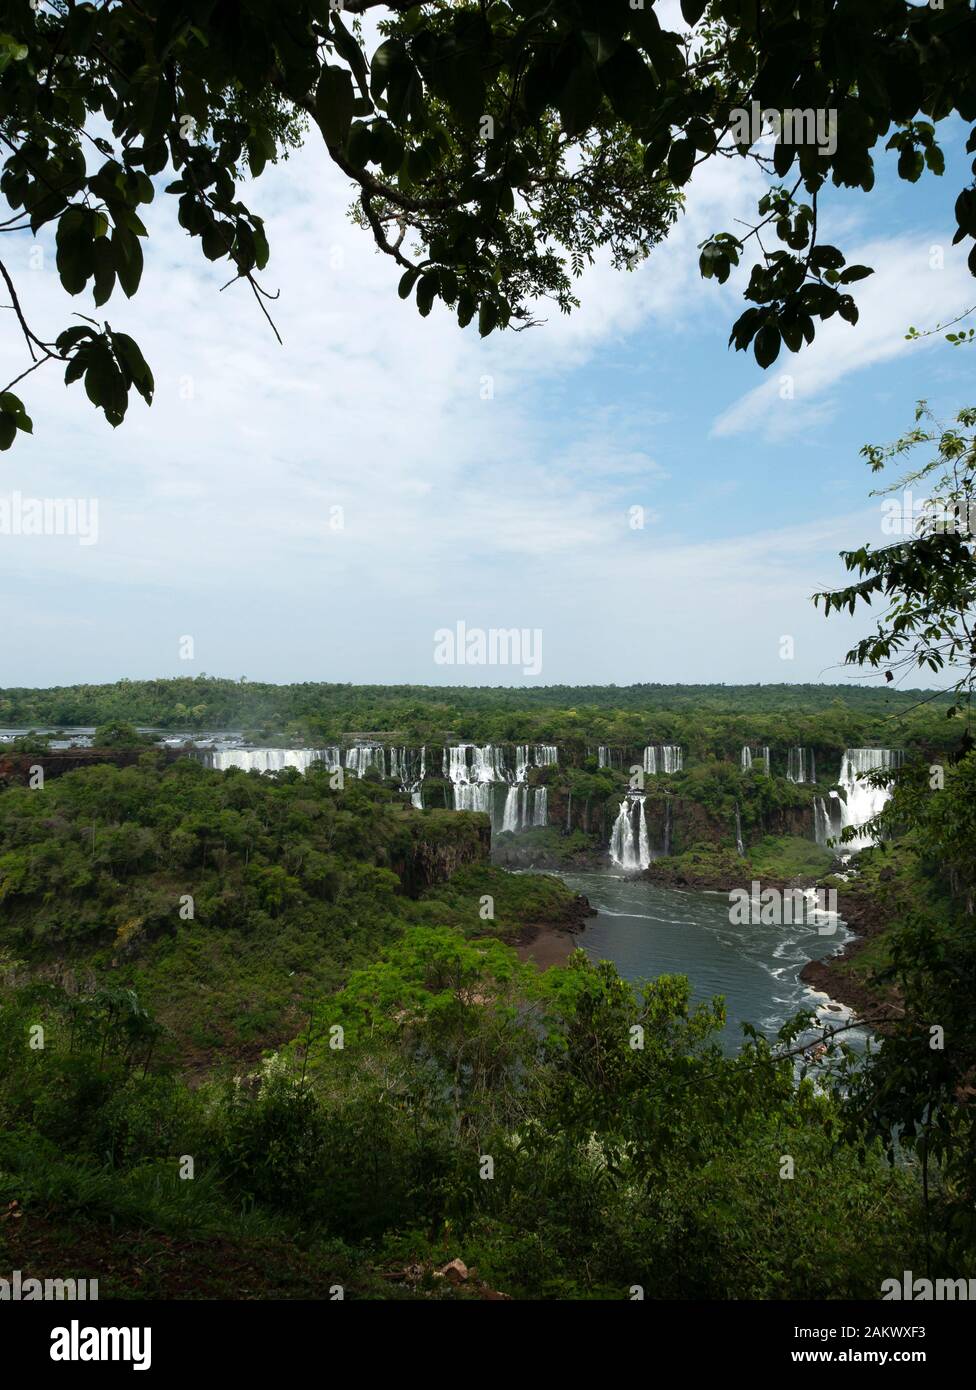 View towards the Iguazu Falls (Iguacu Falls) in Argentina as seen from the Brazilian side of the falls. Iguacu Falls National Park, Brazil. Stock Photo